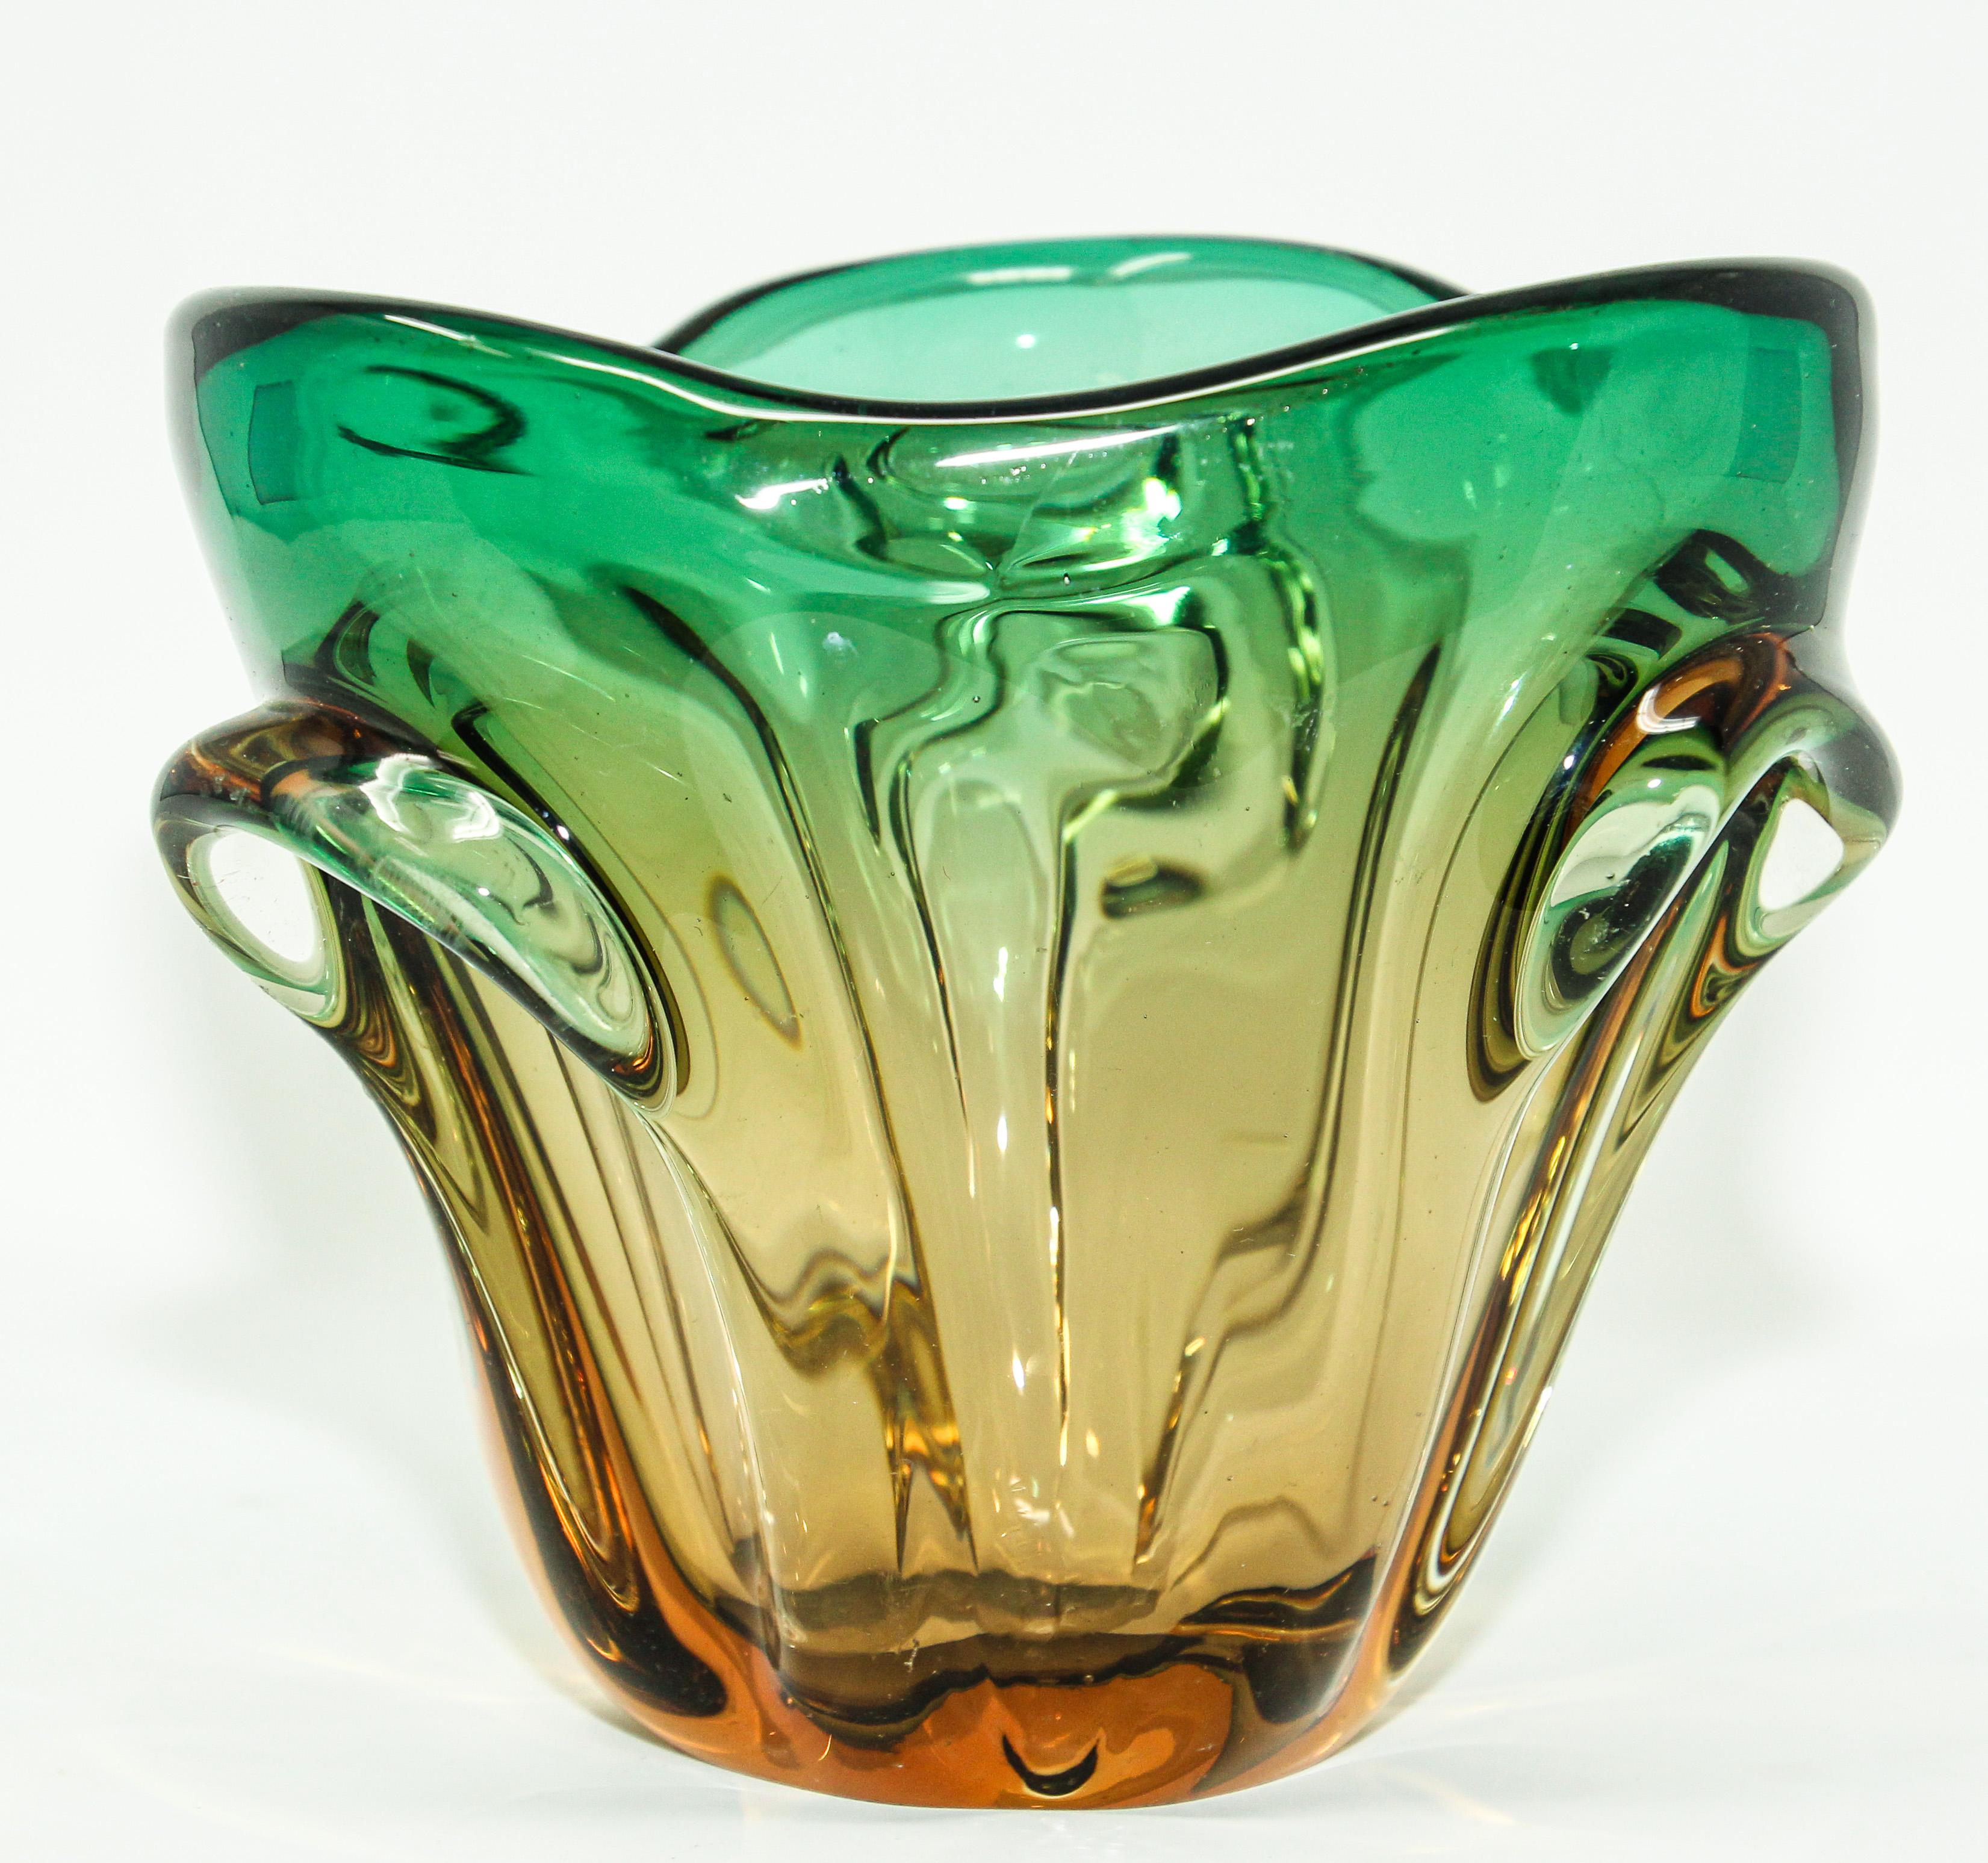 Green and amber colored Sommerso Murano glass vase or ice bucket by Flavio Poli for Seguso.
Sommerso Murano glass vase with a beautiful color combination and distribution.
Design by Flavio Poli for Seguso, Italy 1960s.
This hand-blown vase glass